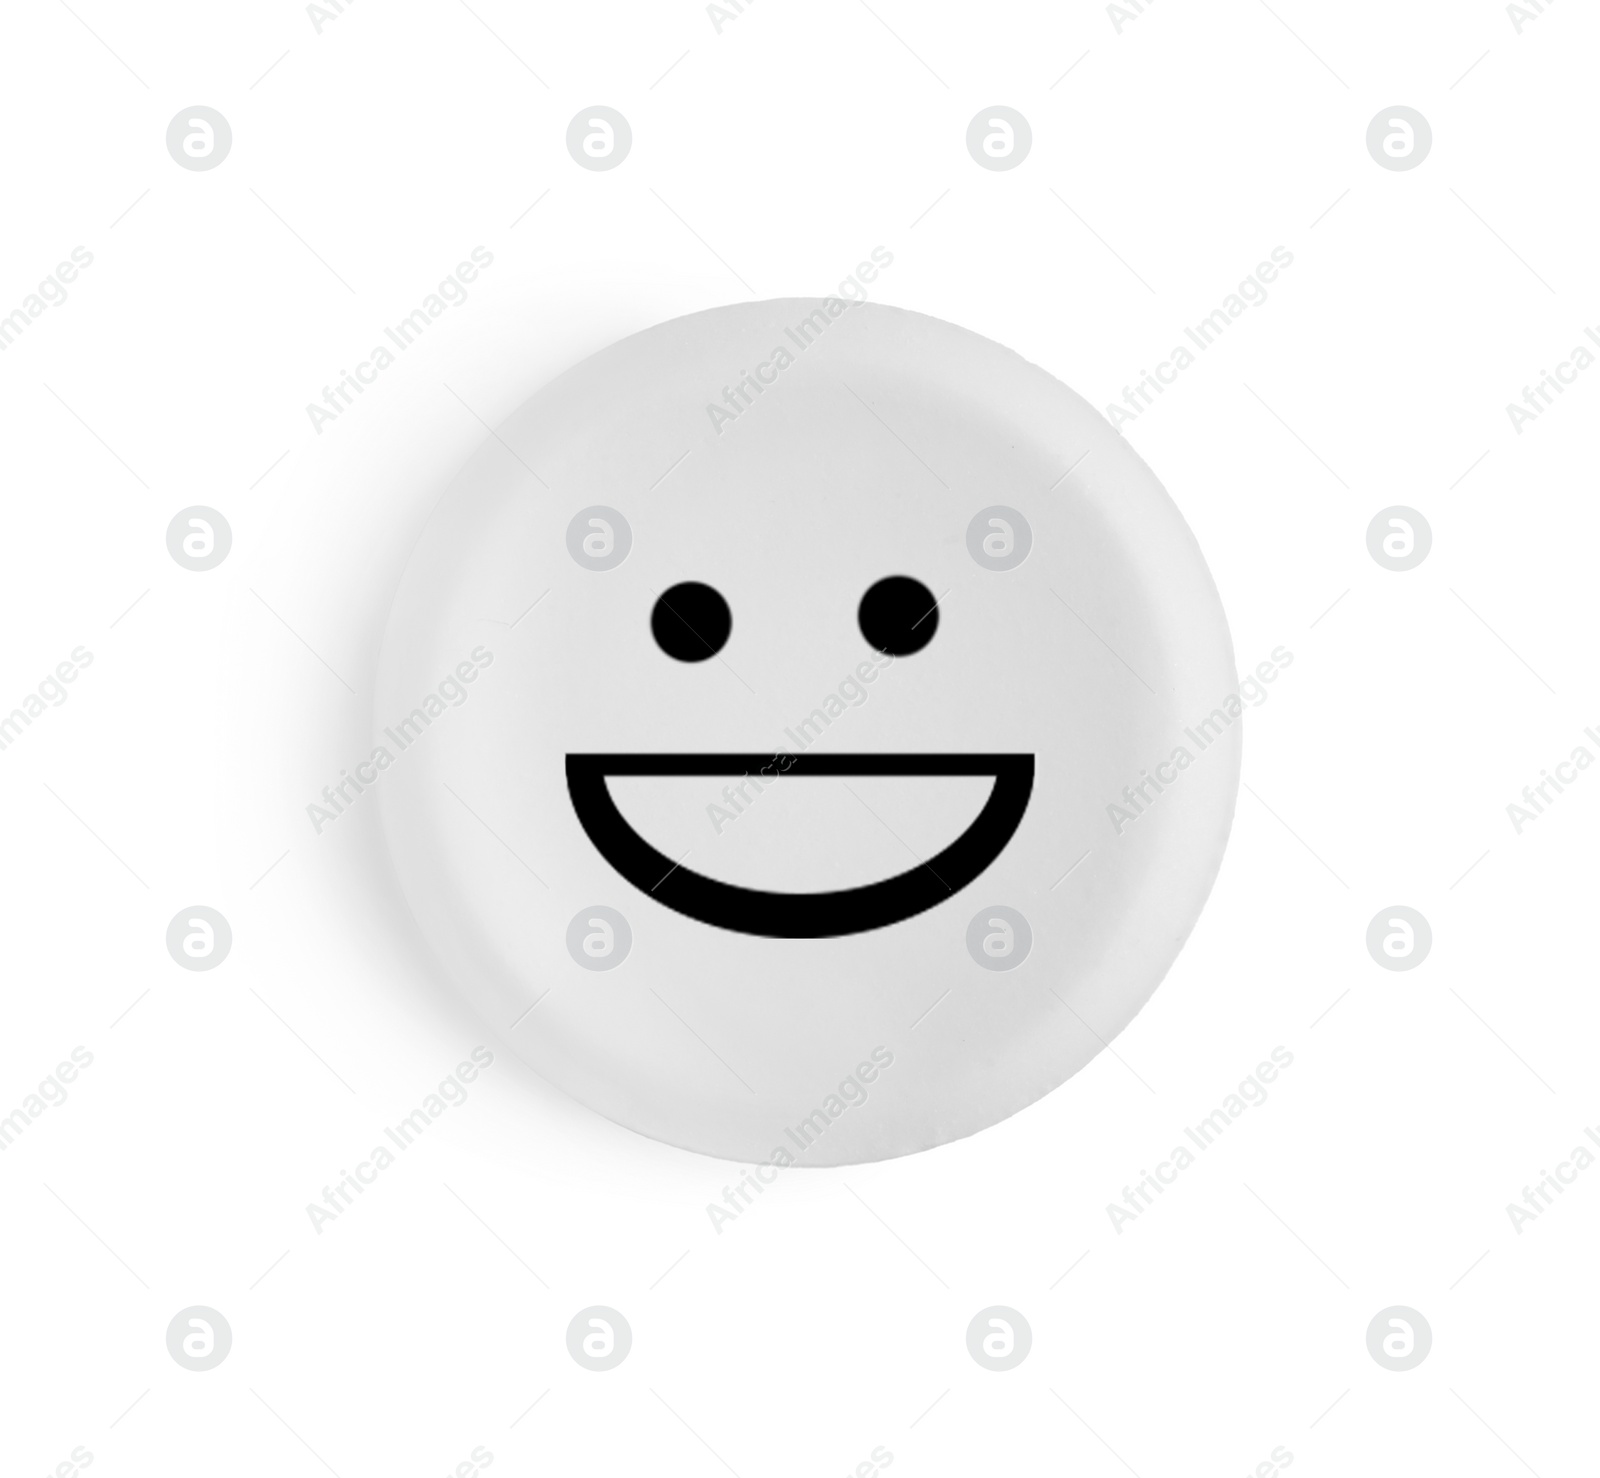 Image of One round pill with smiling face on white background